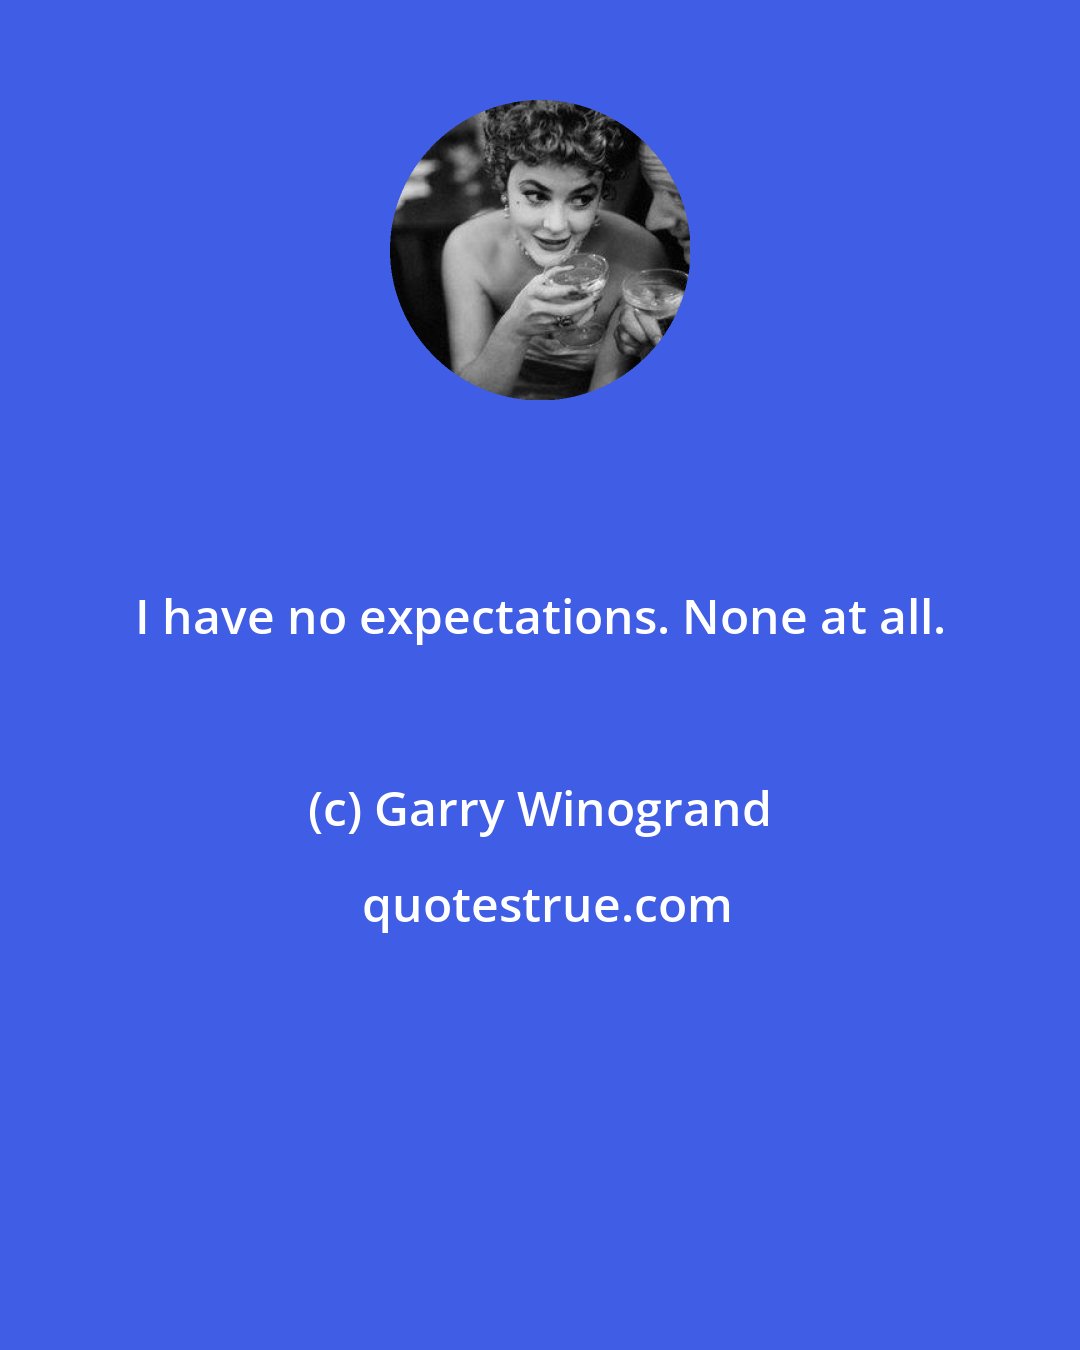 Garry Winogrand: I have no expectations. None at all.